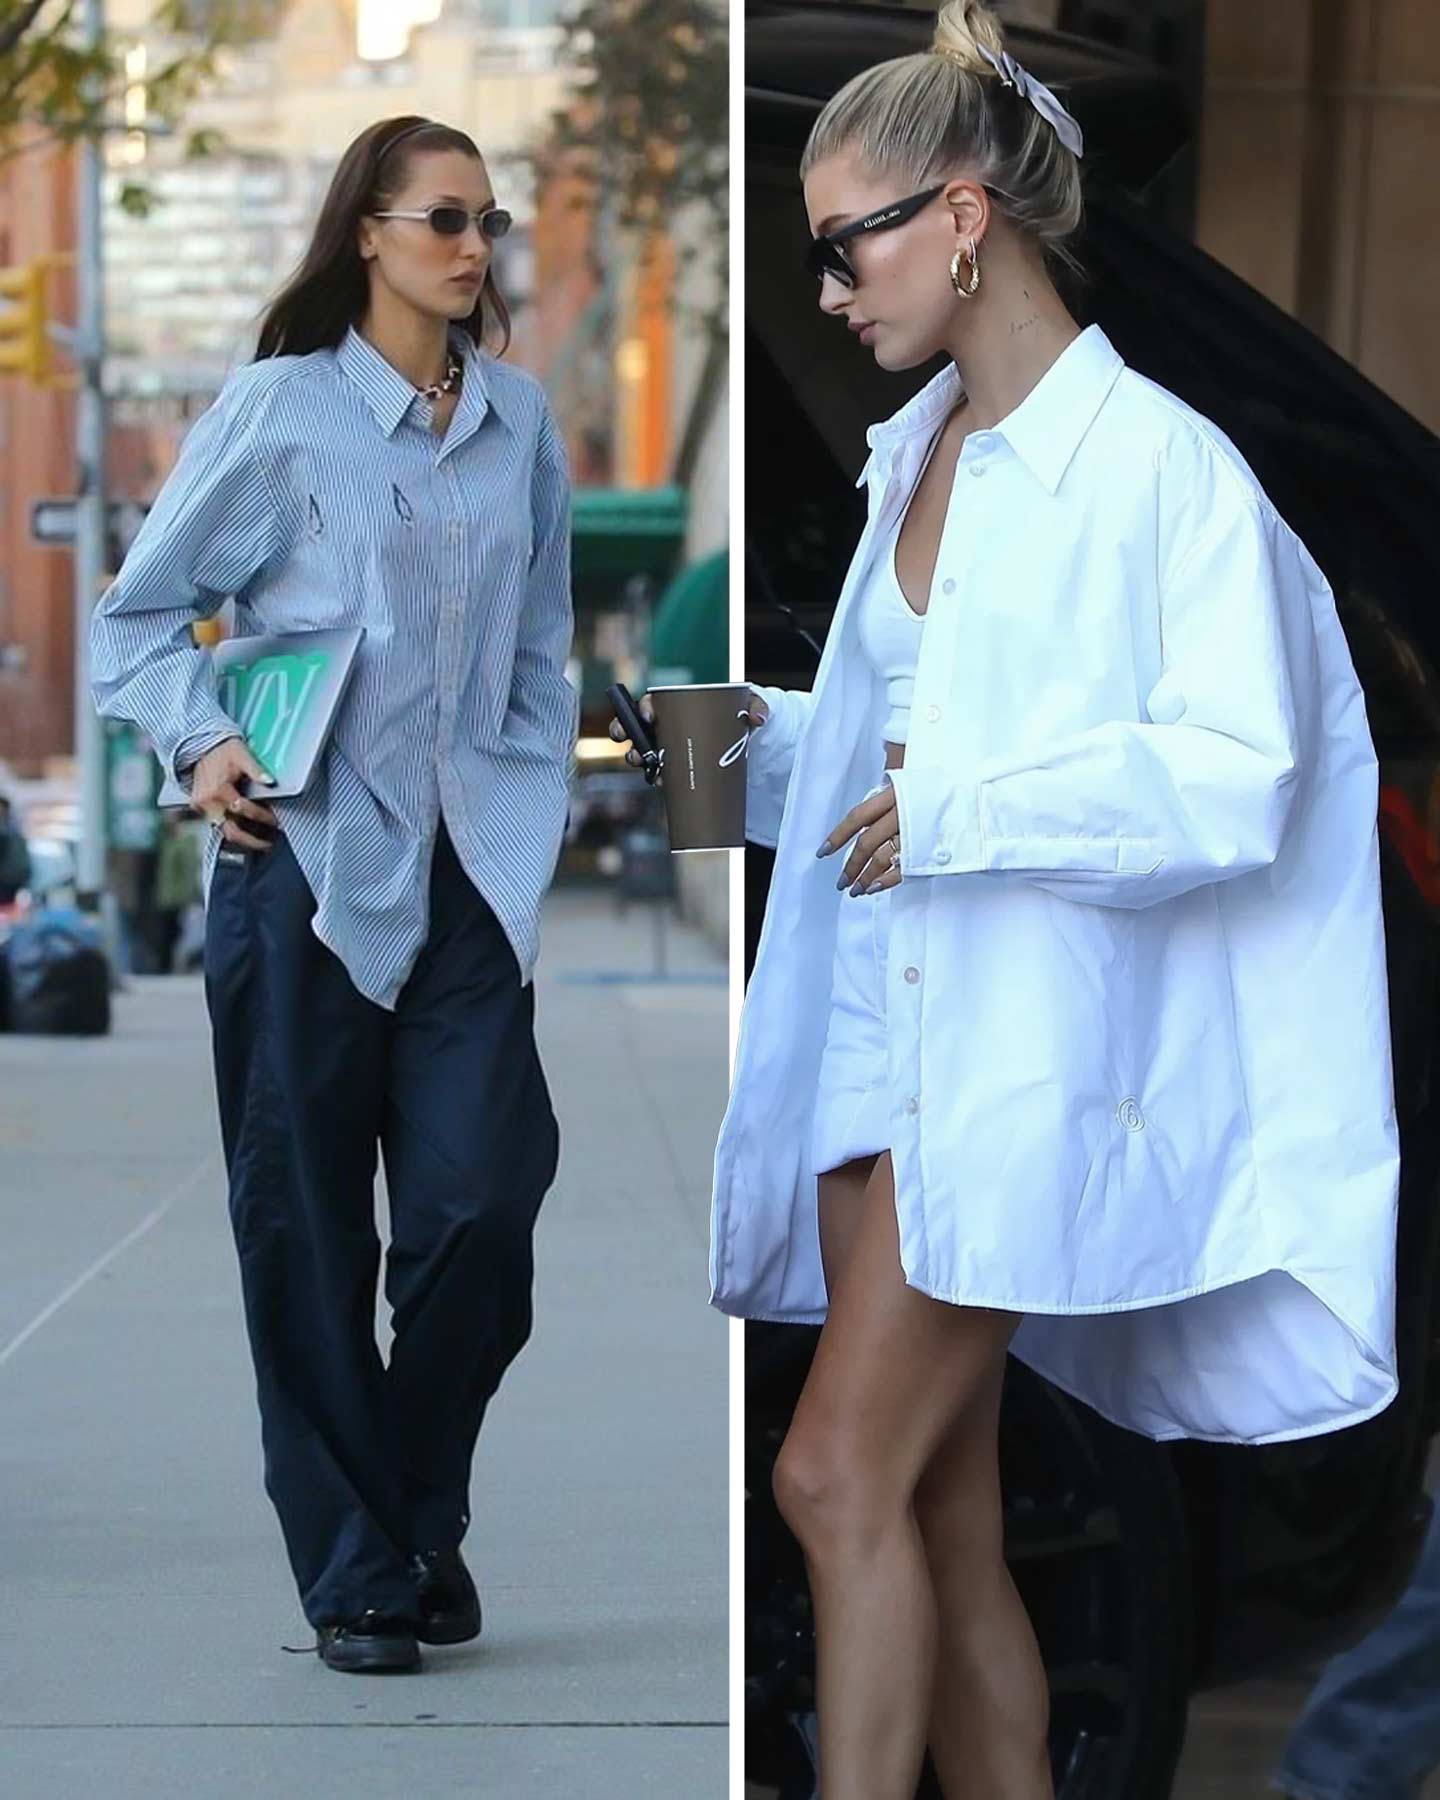 Hailey Bieber Wears an Oversized Tuxedo Jacket With Nothing Underneath